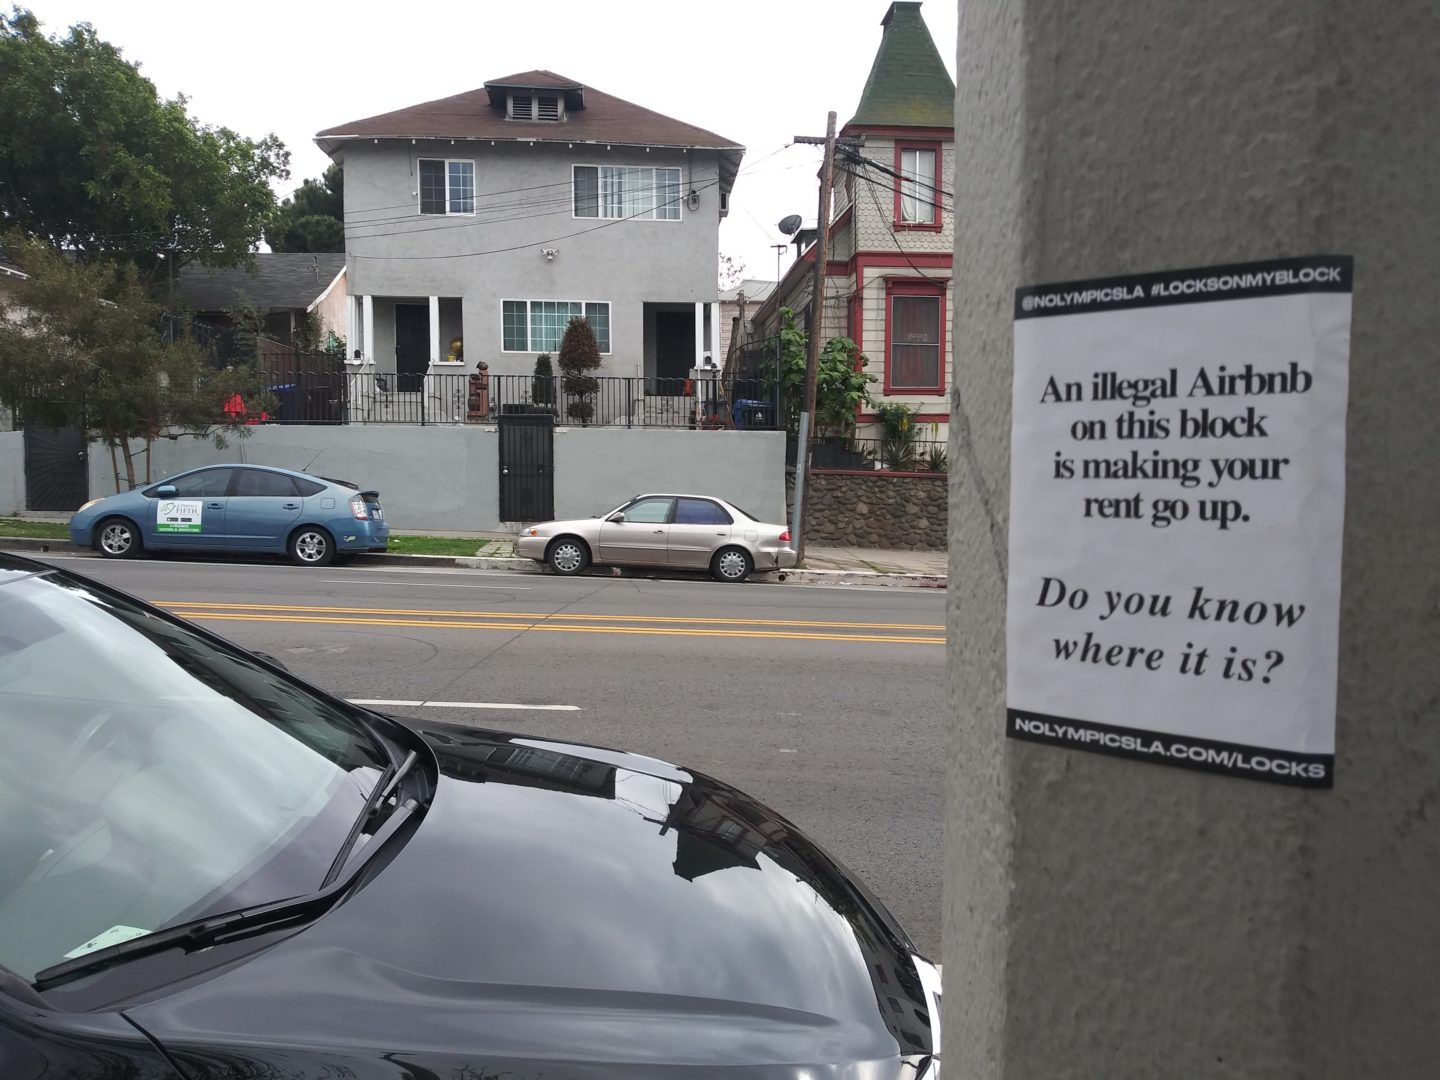 A sign reads "An illegal Airbnb on this block is making your rent go up. Do you know where it is?" 